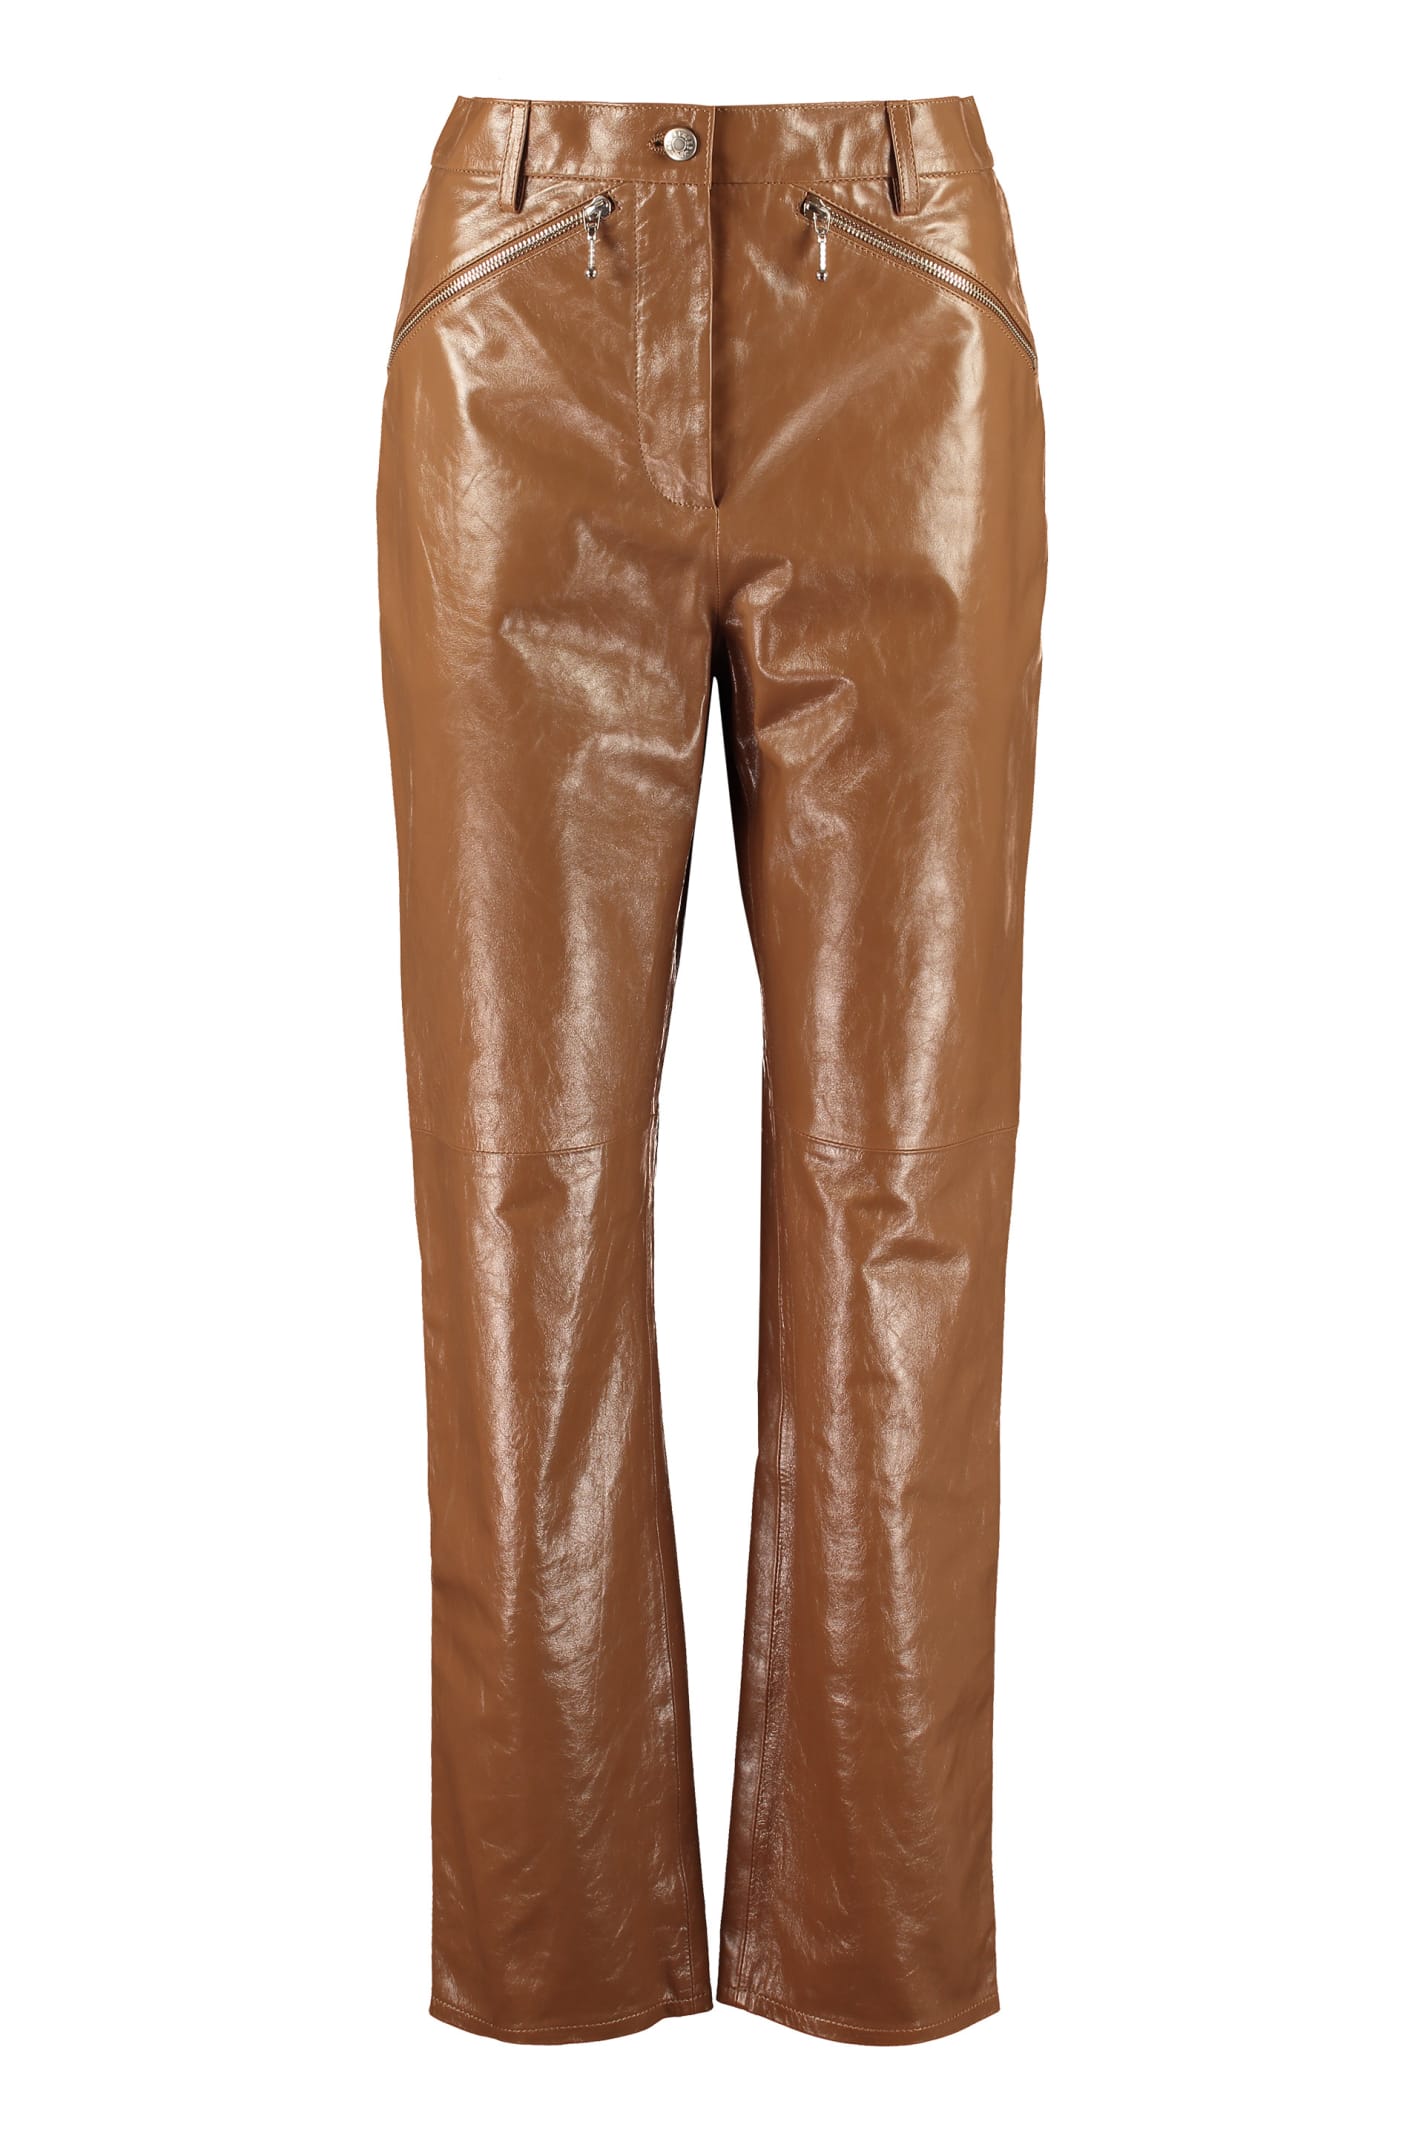 Alexa Chung Leather Pants In Mud